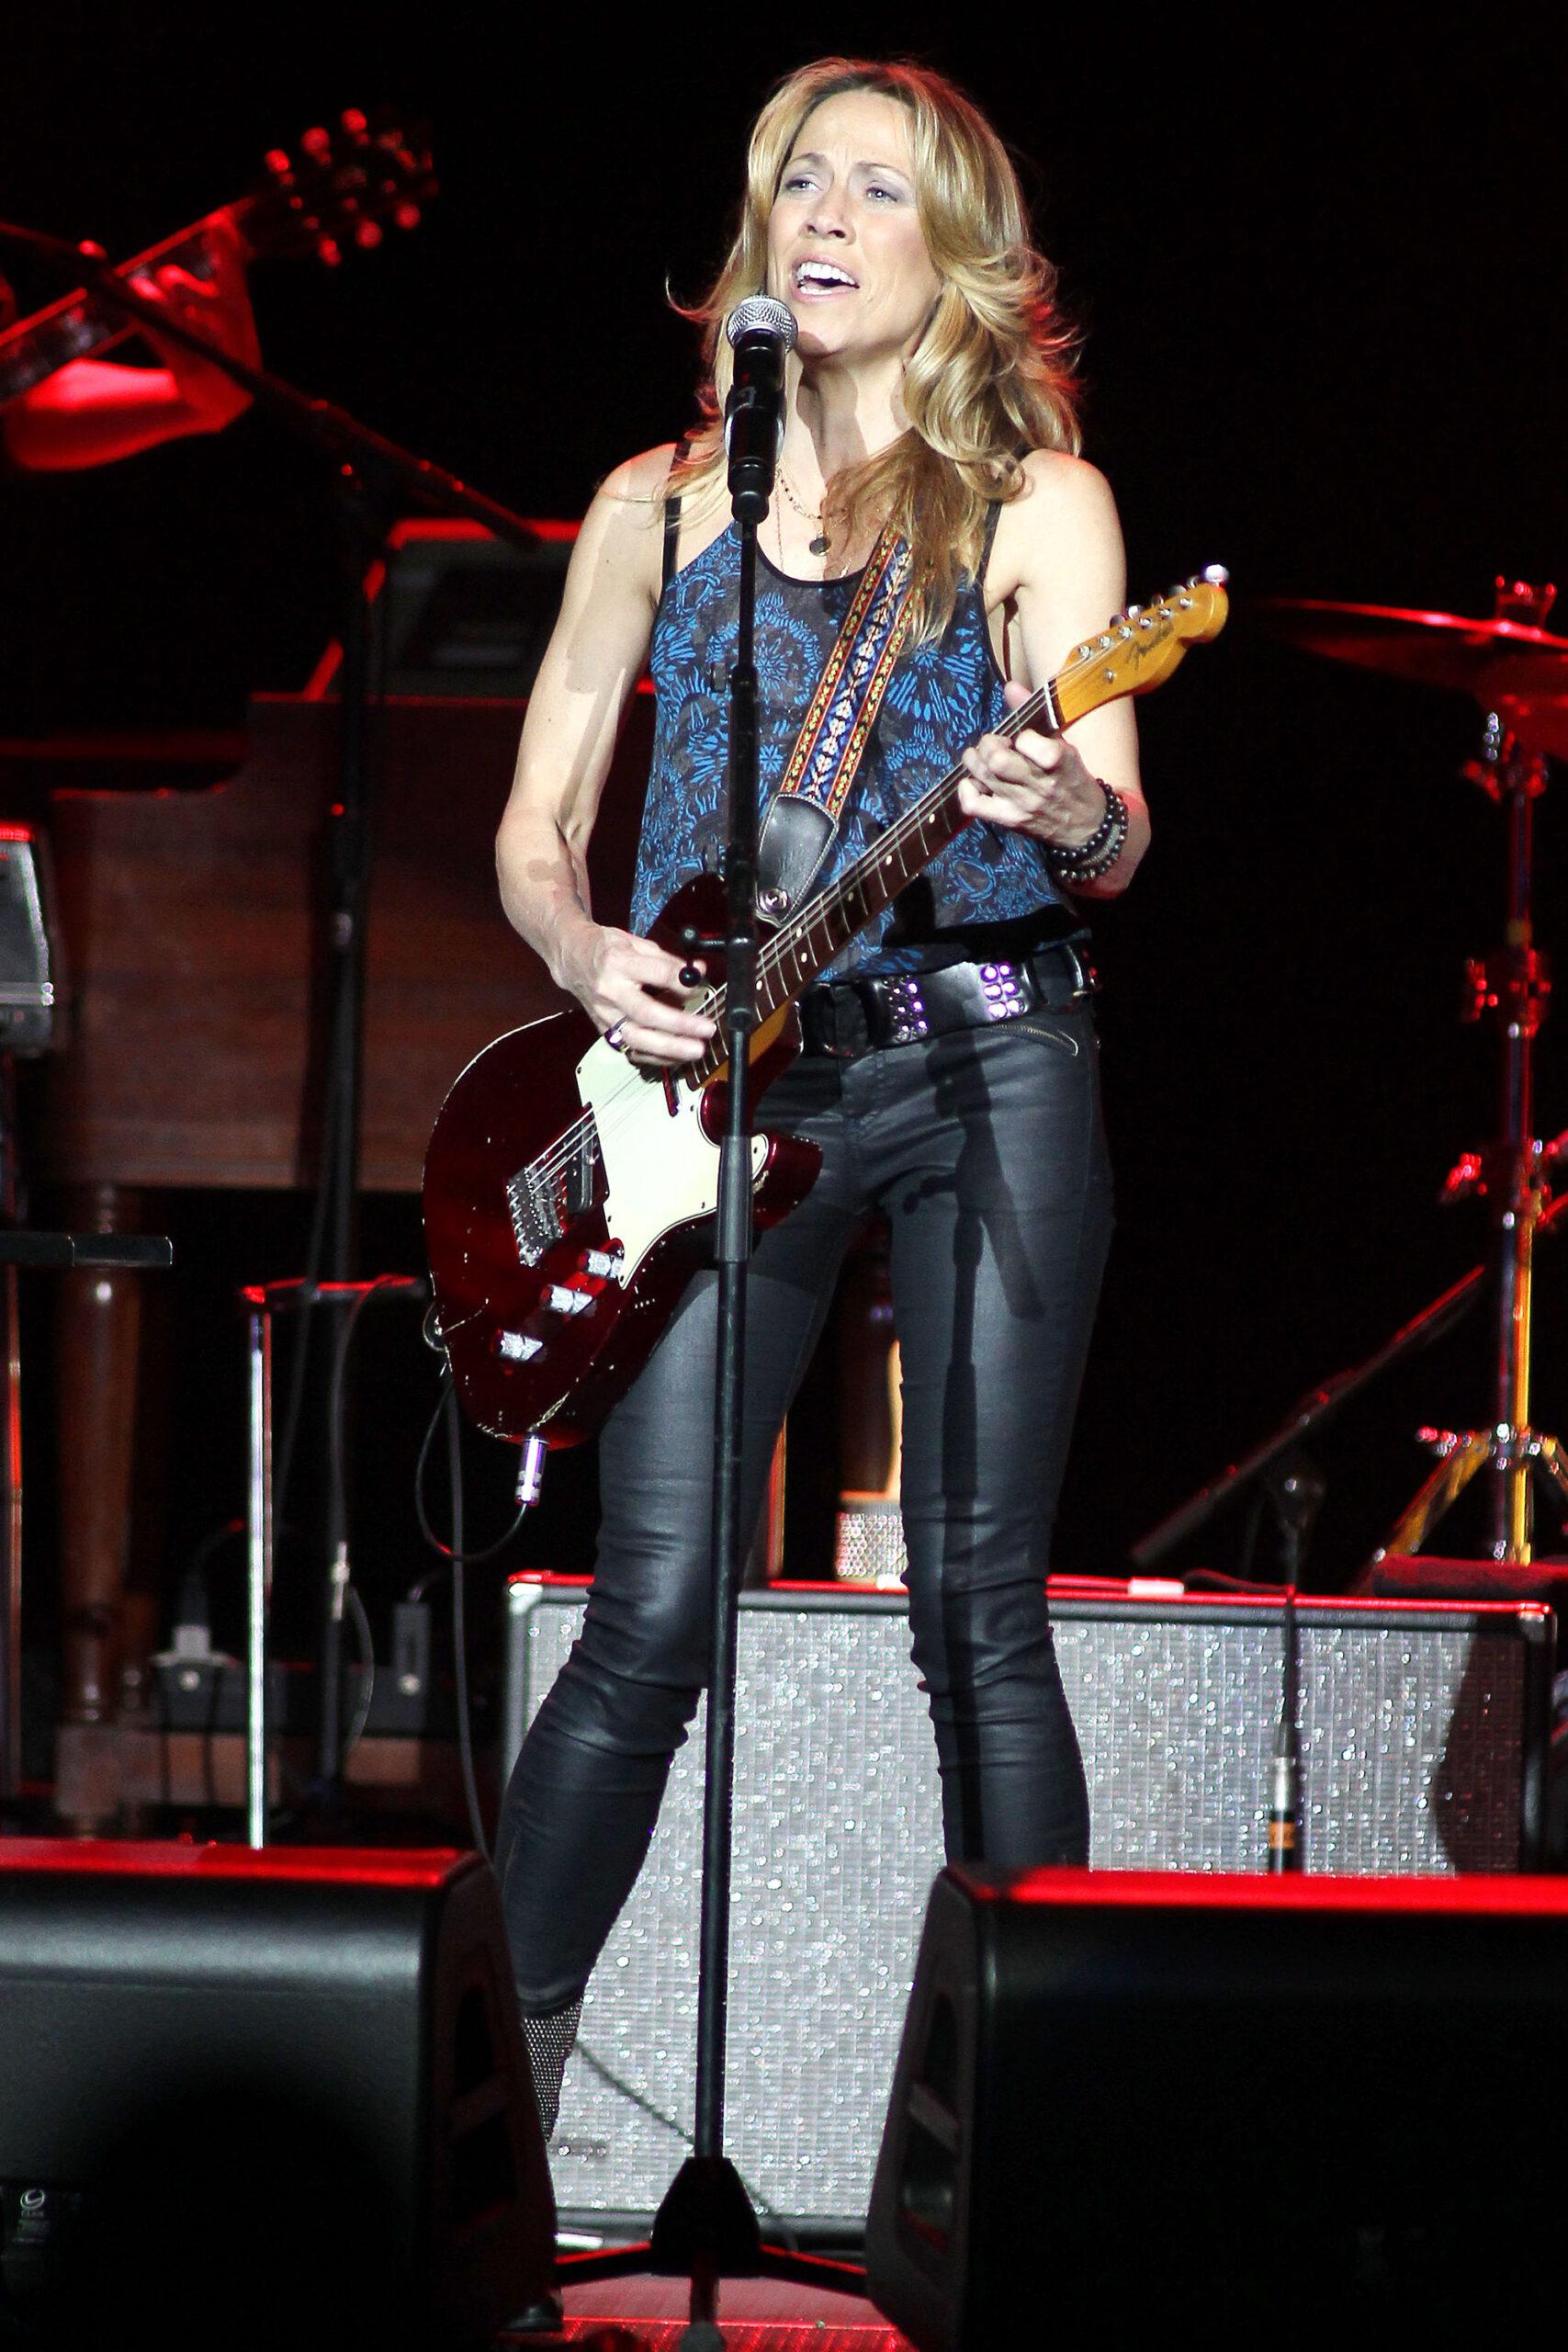 Sheryl Crow performs in concert at Hard Rock Live at Seminole Hard Rock Hotel & Casino, Hollywood on 03/16/2016